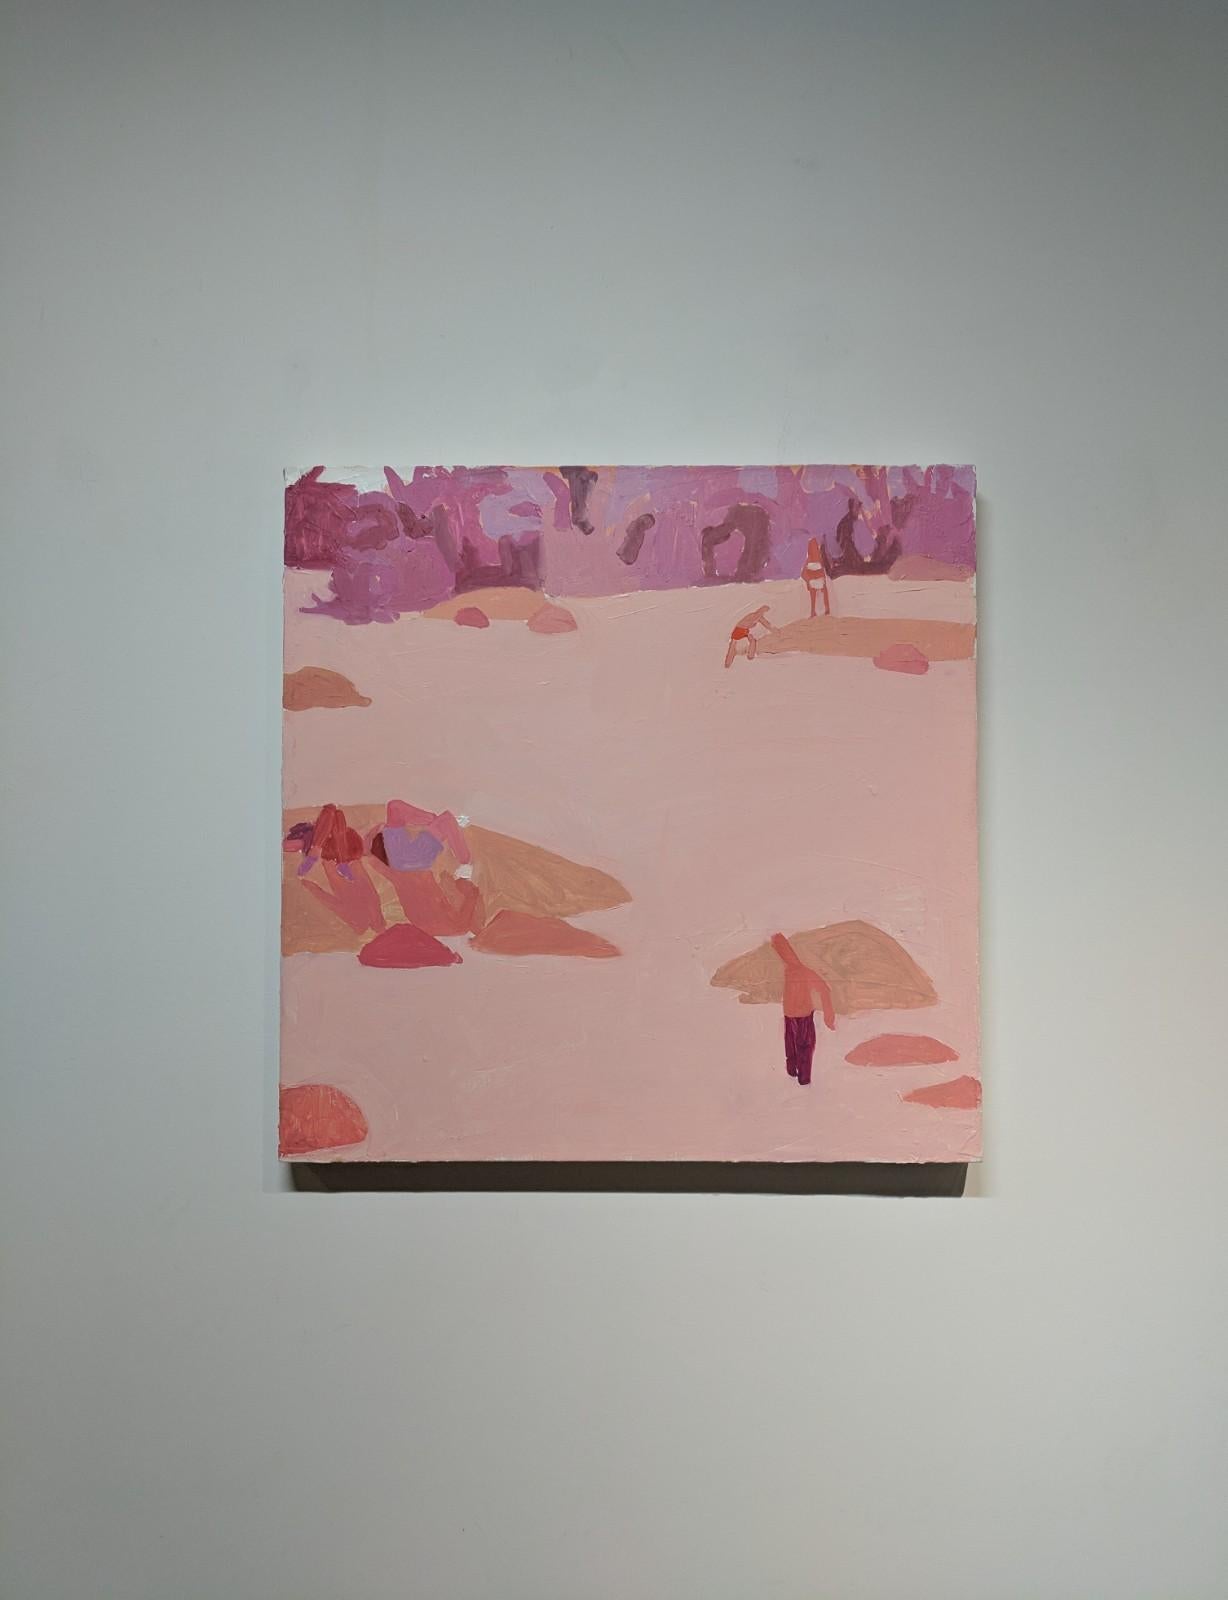 Rose James, Swimmers in River, Summer Landscape in Pinks, Red and Peach - Painting by Sophie Treppendahl